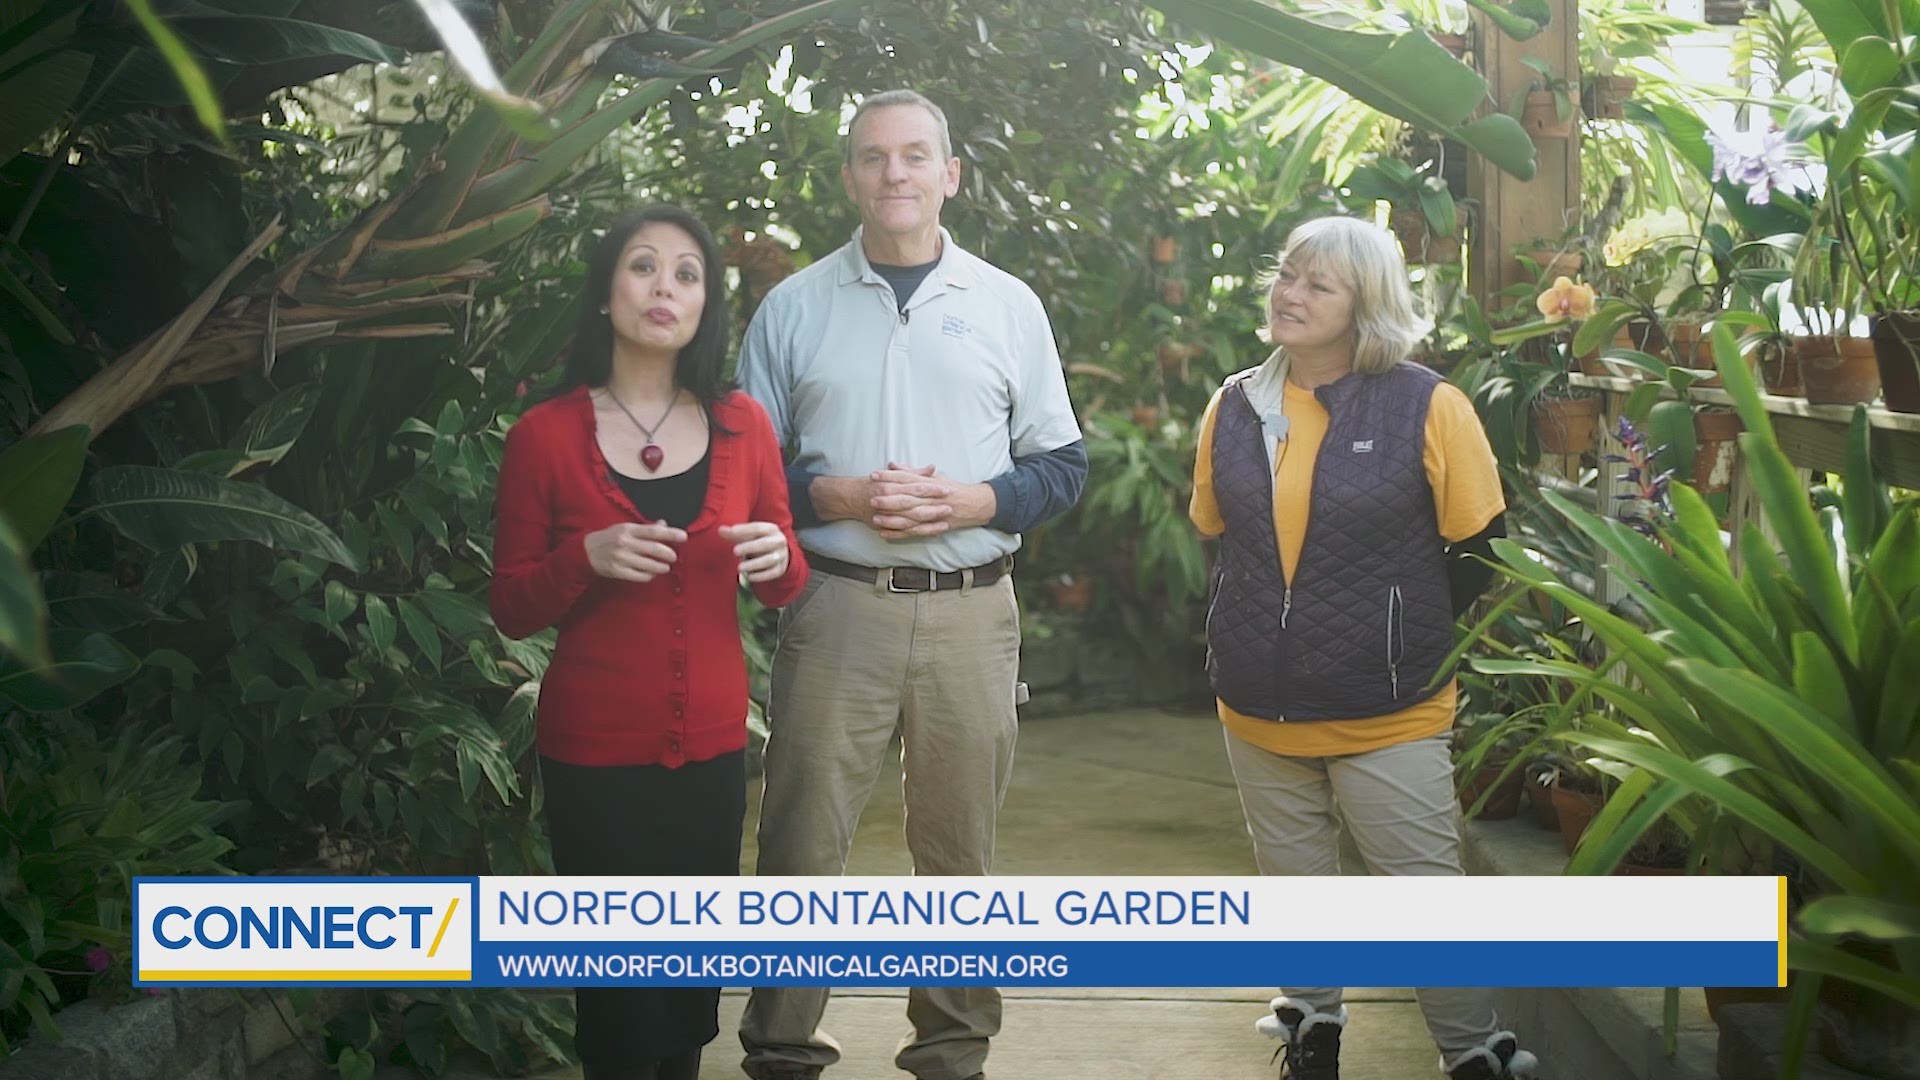 Orchids are beautiful to look at, but can be hard to keep. We got some good tips on how to care for them at Norfolk Botanical Garden.